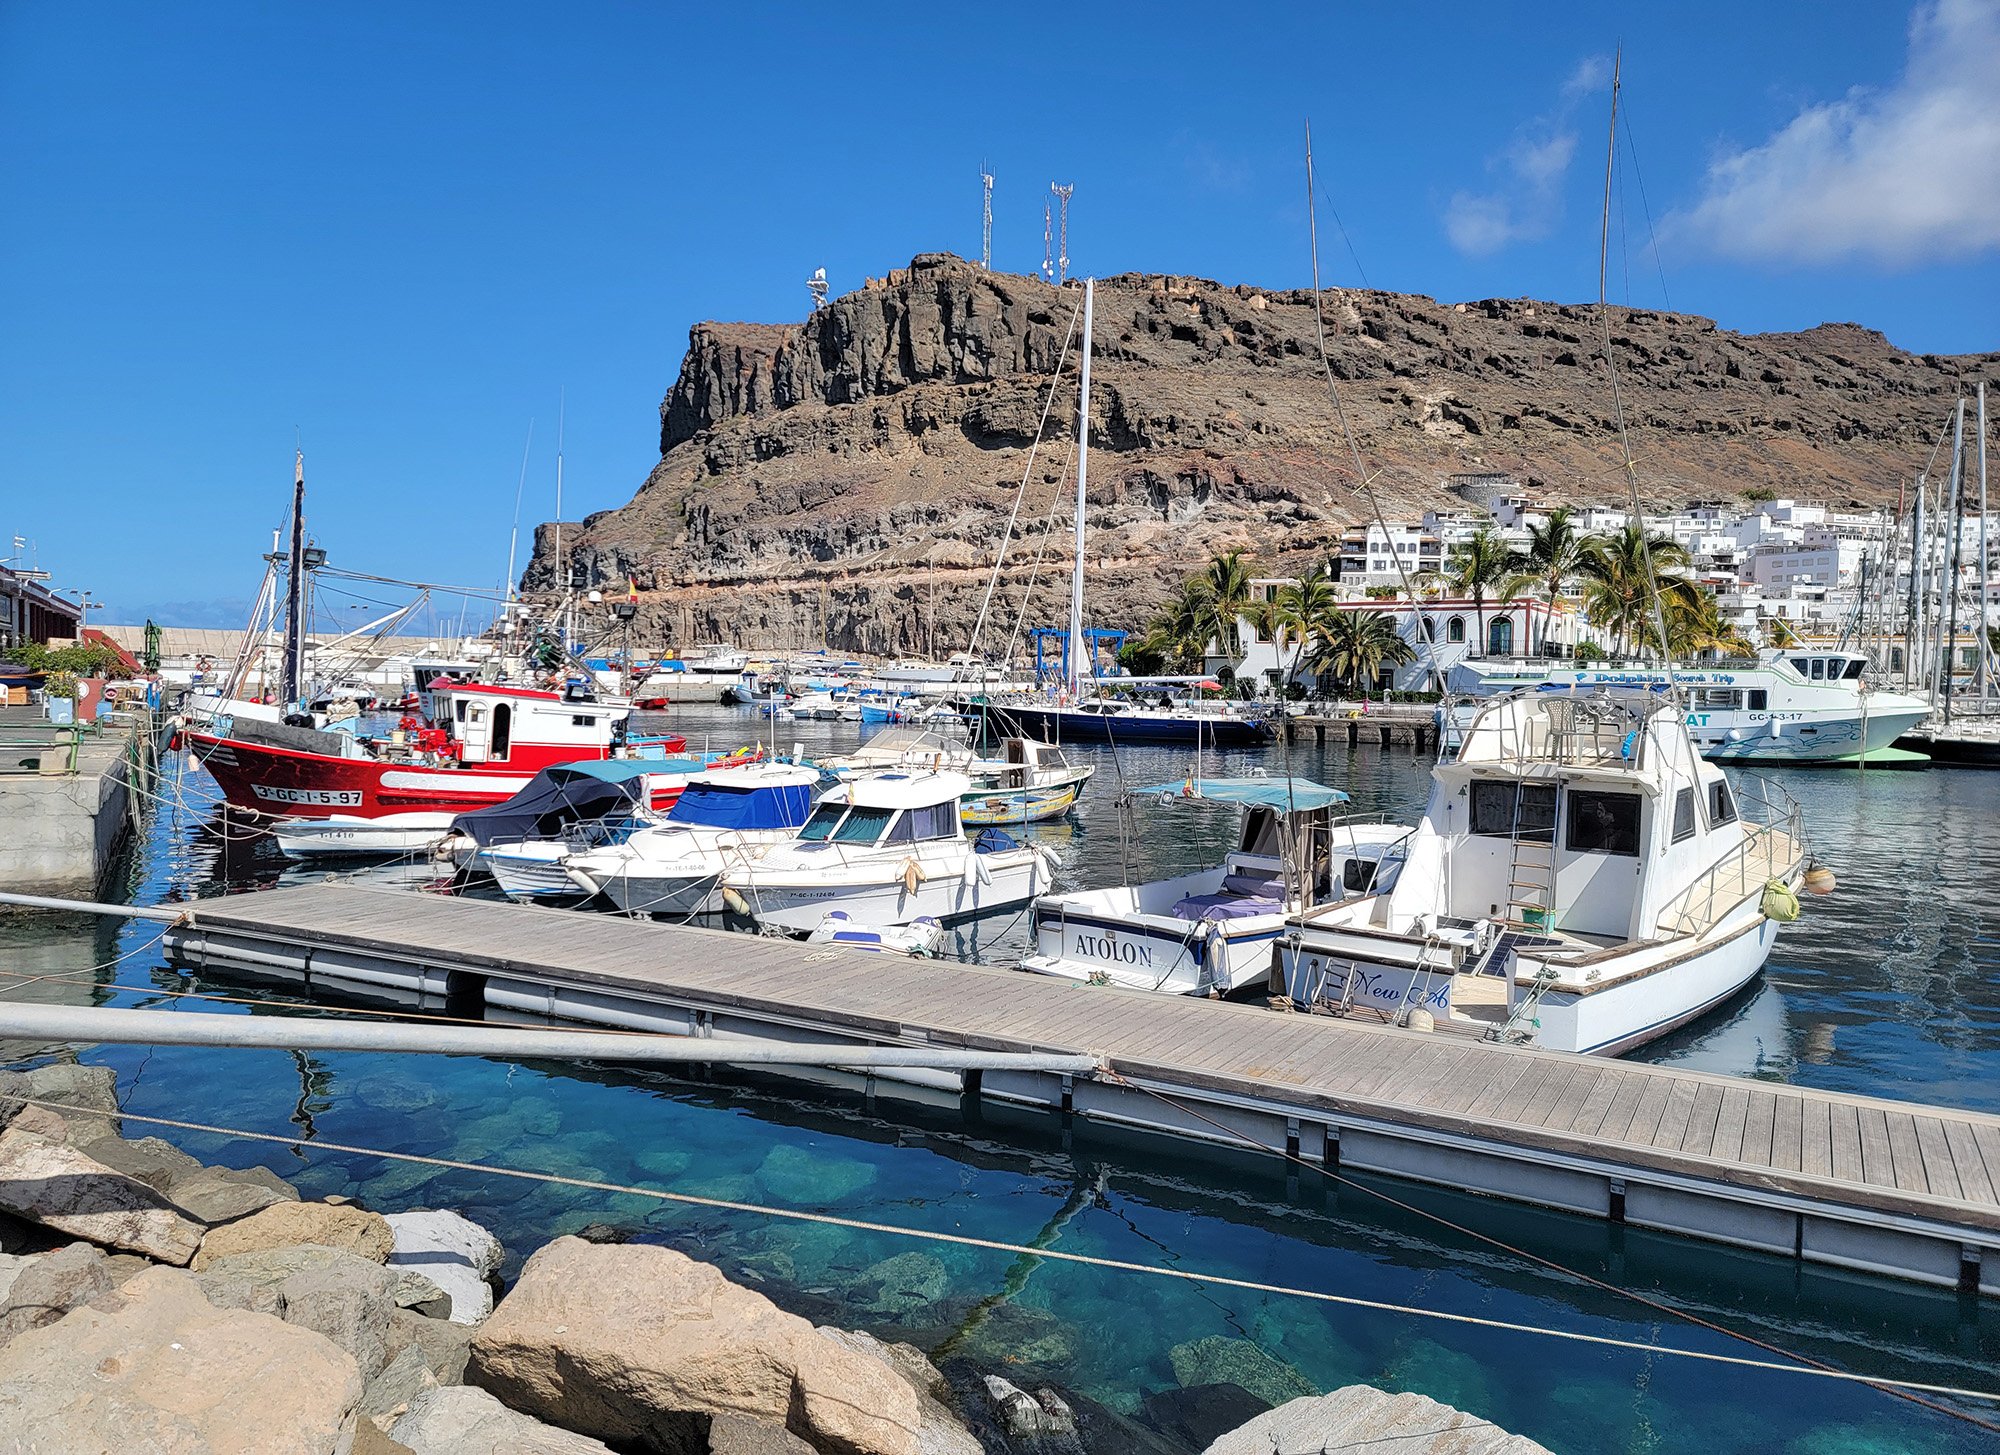 The harbor / town are nested at the base of these huge desert cliffs on the southern tip of Gran Canaria.